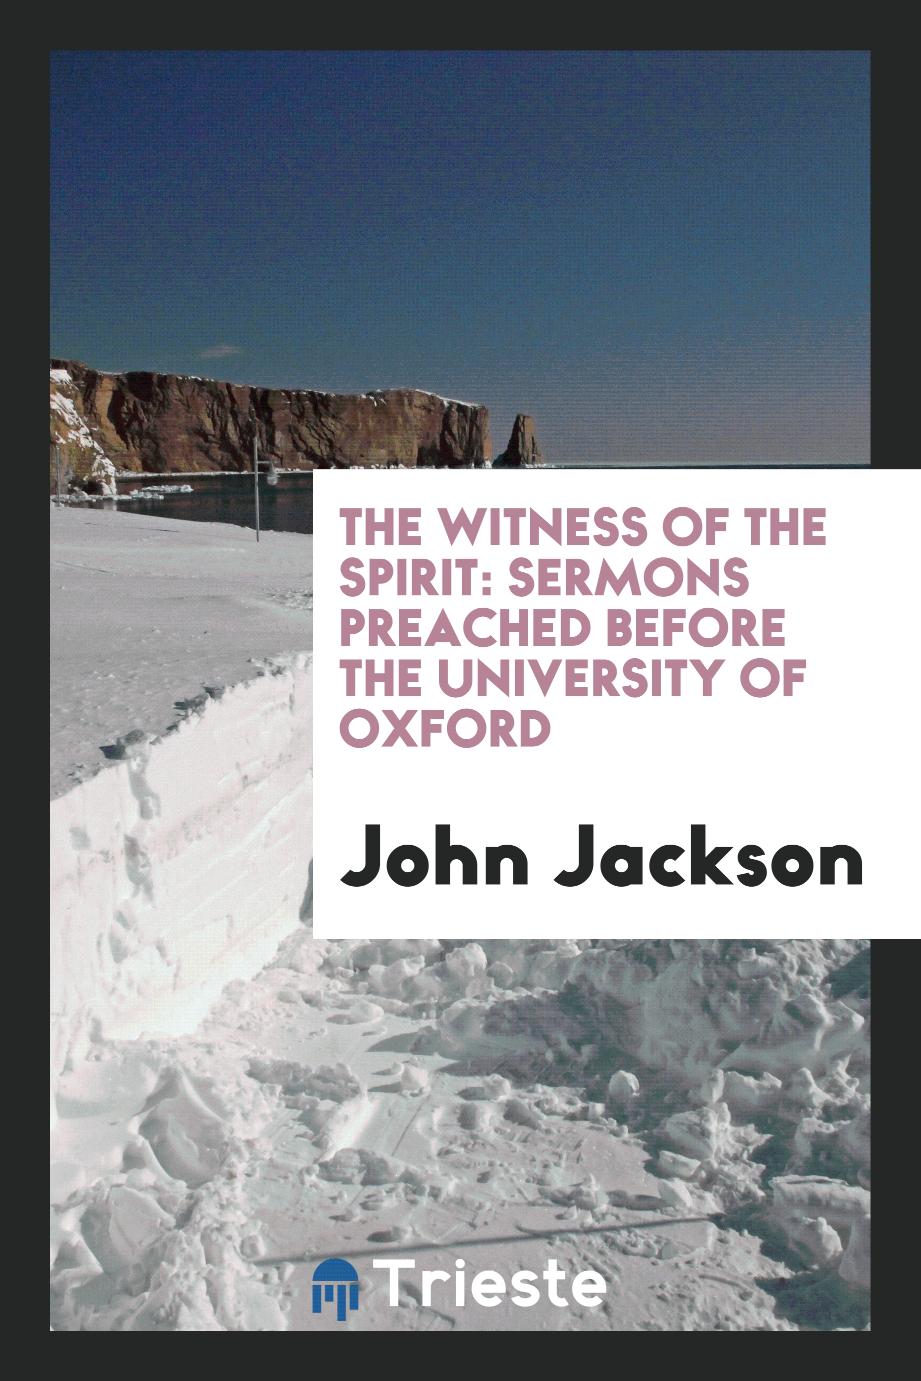 The witness of the spirit: sermons preached before the University of Oxford